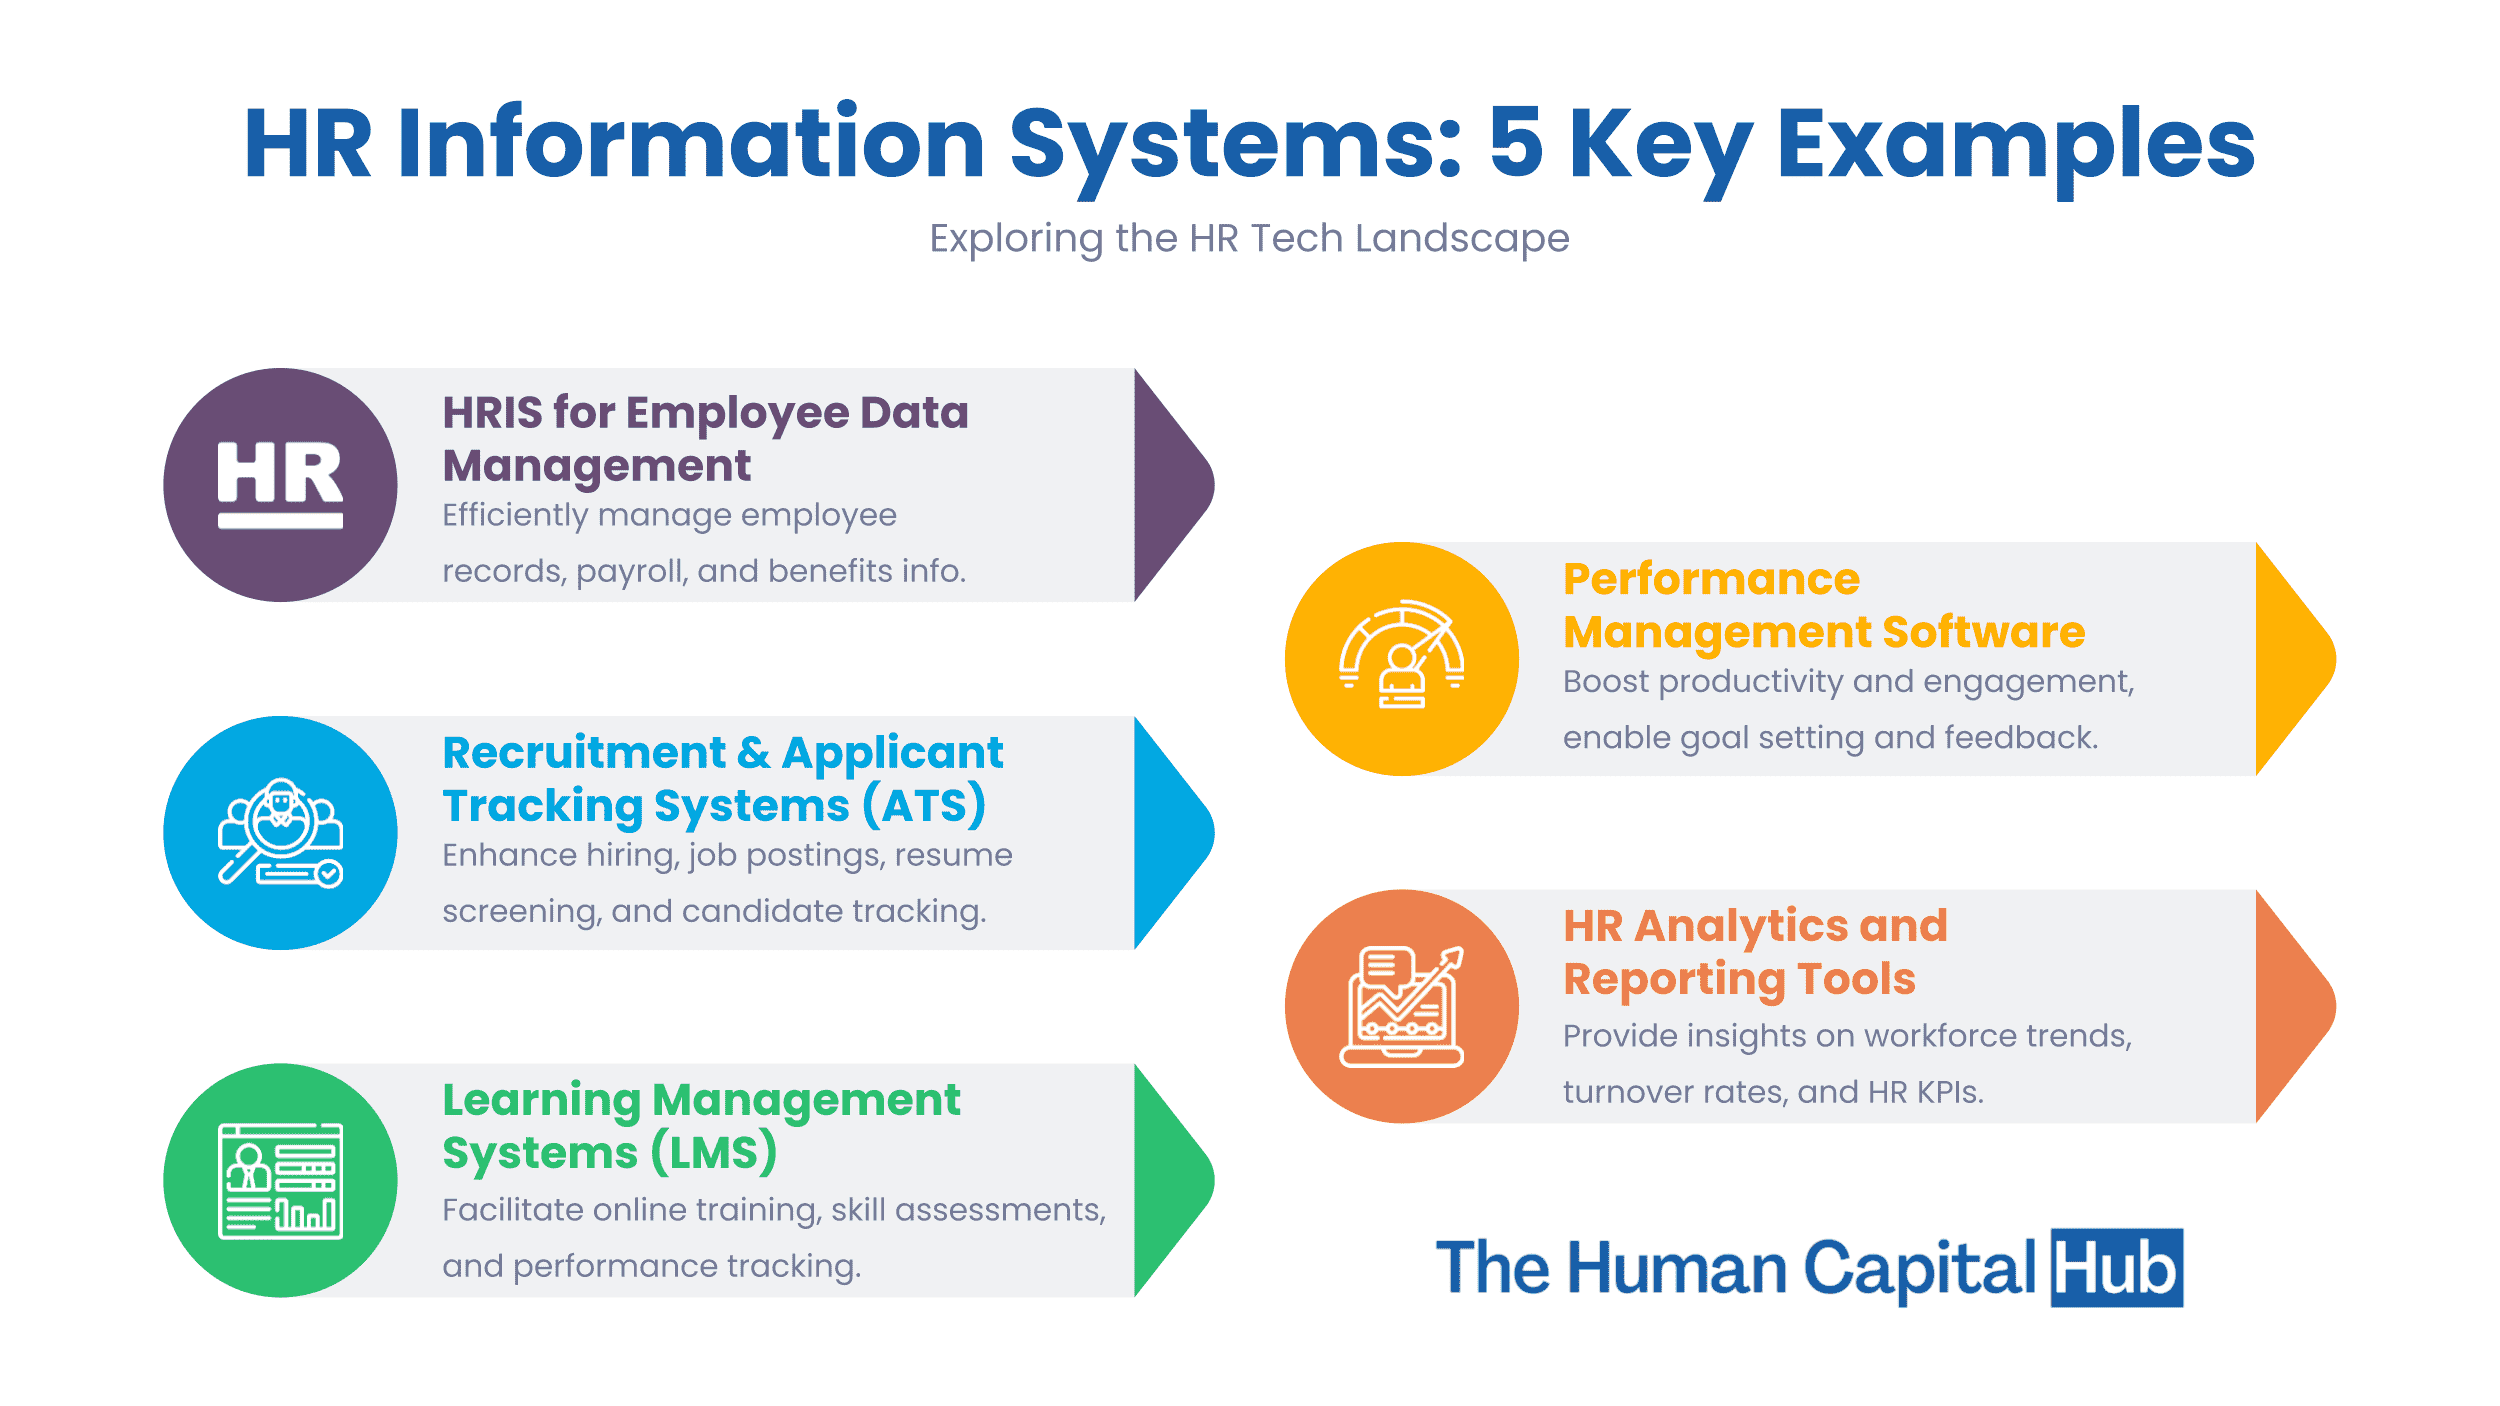 What are Examples of HR Information Systems?